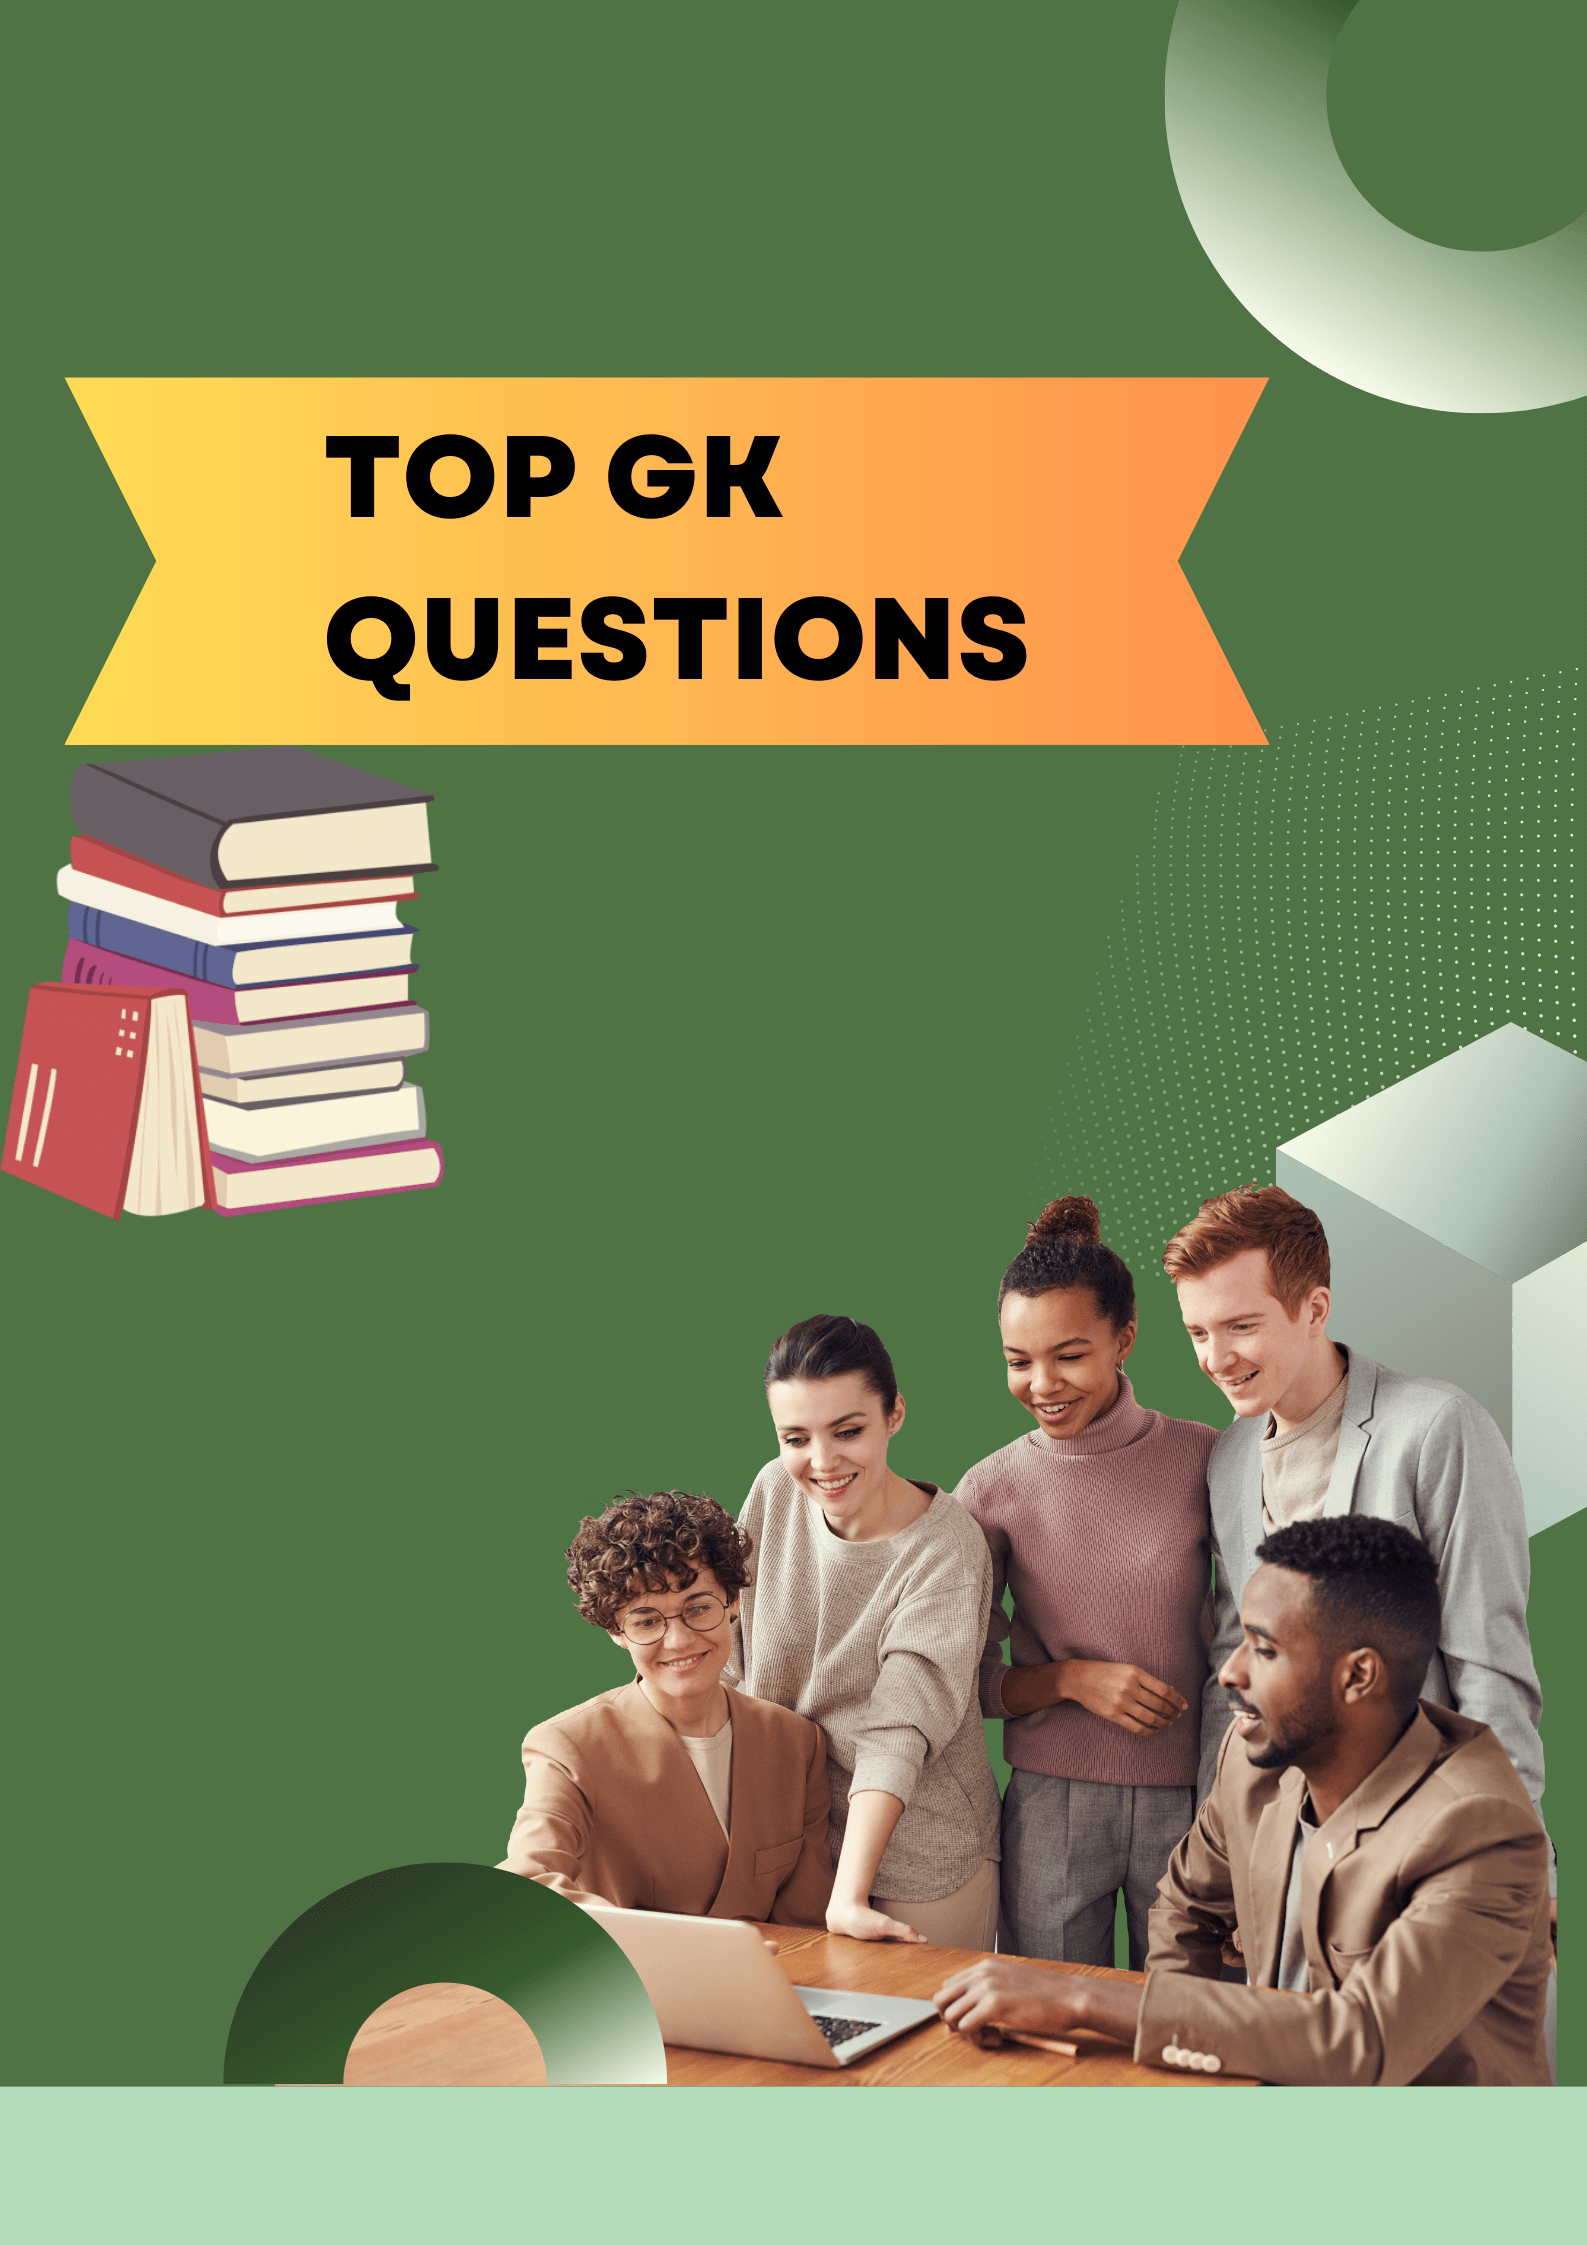 Top gk questions in English with answers